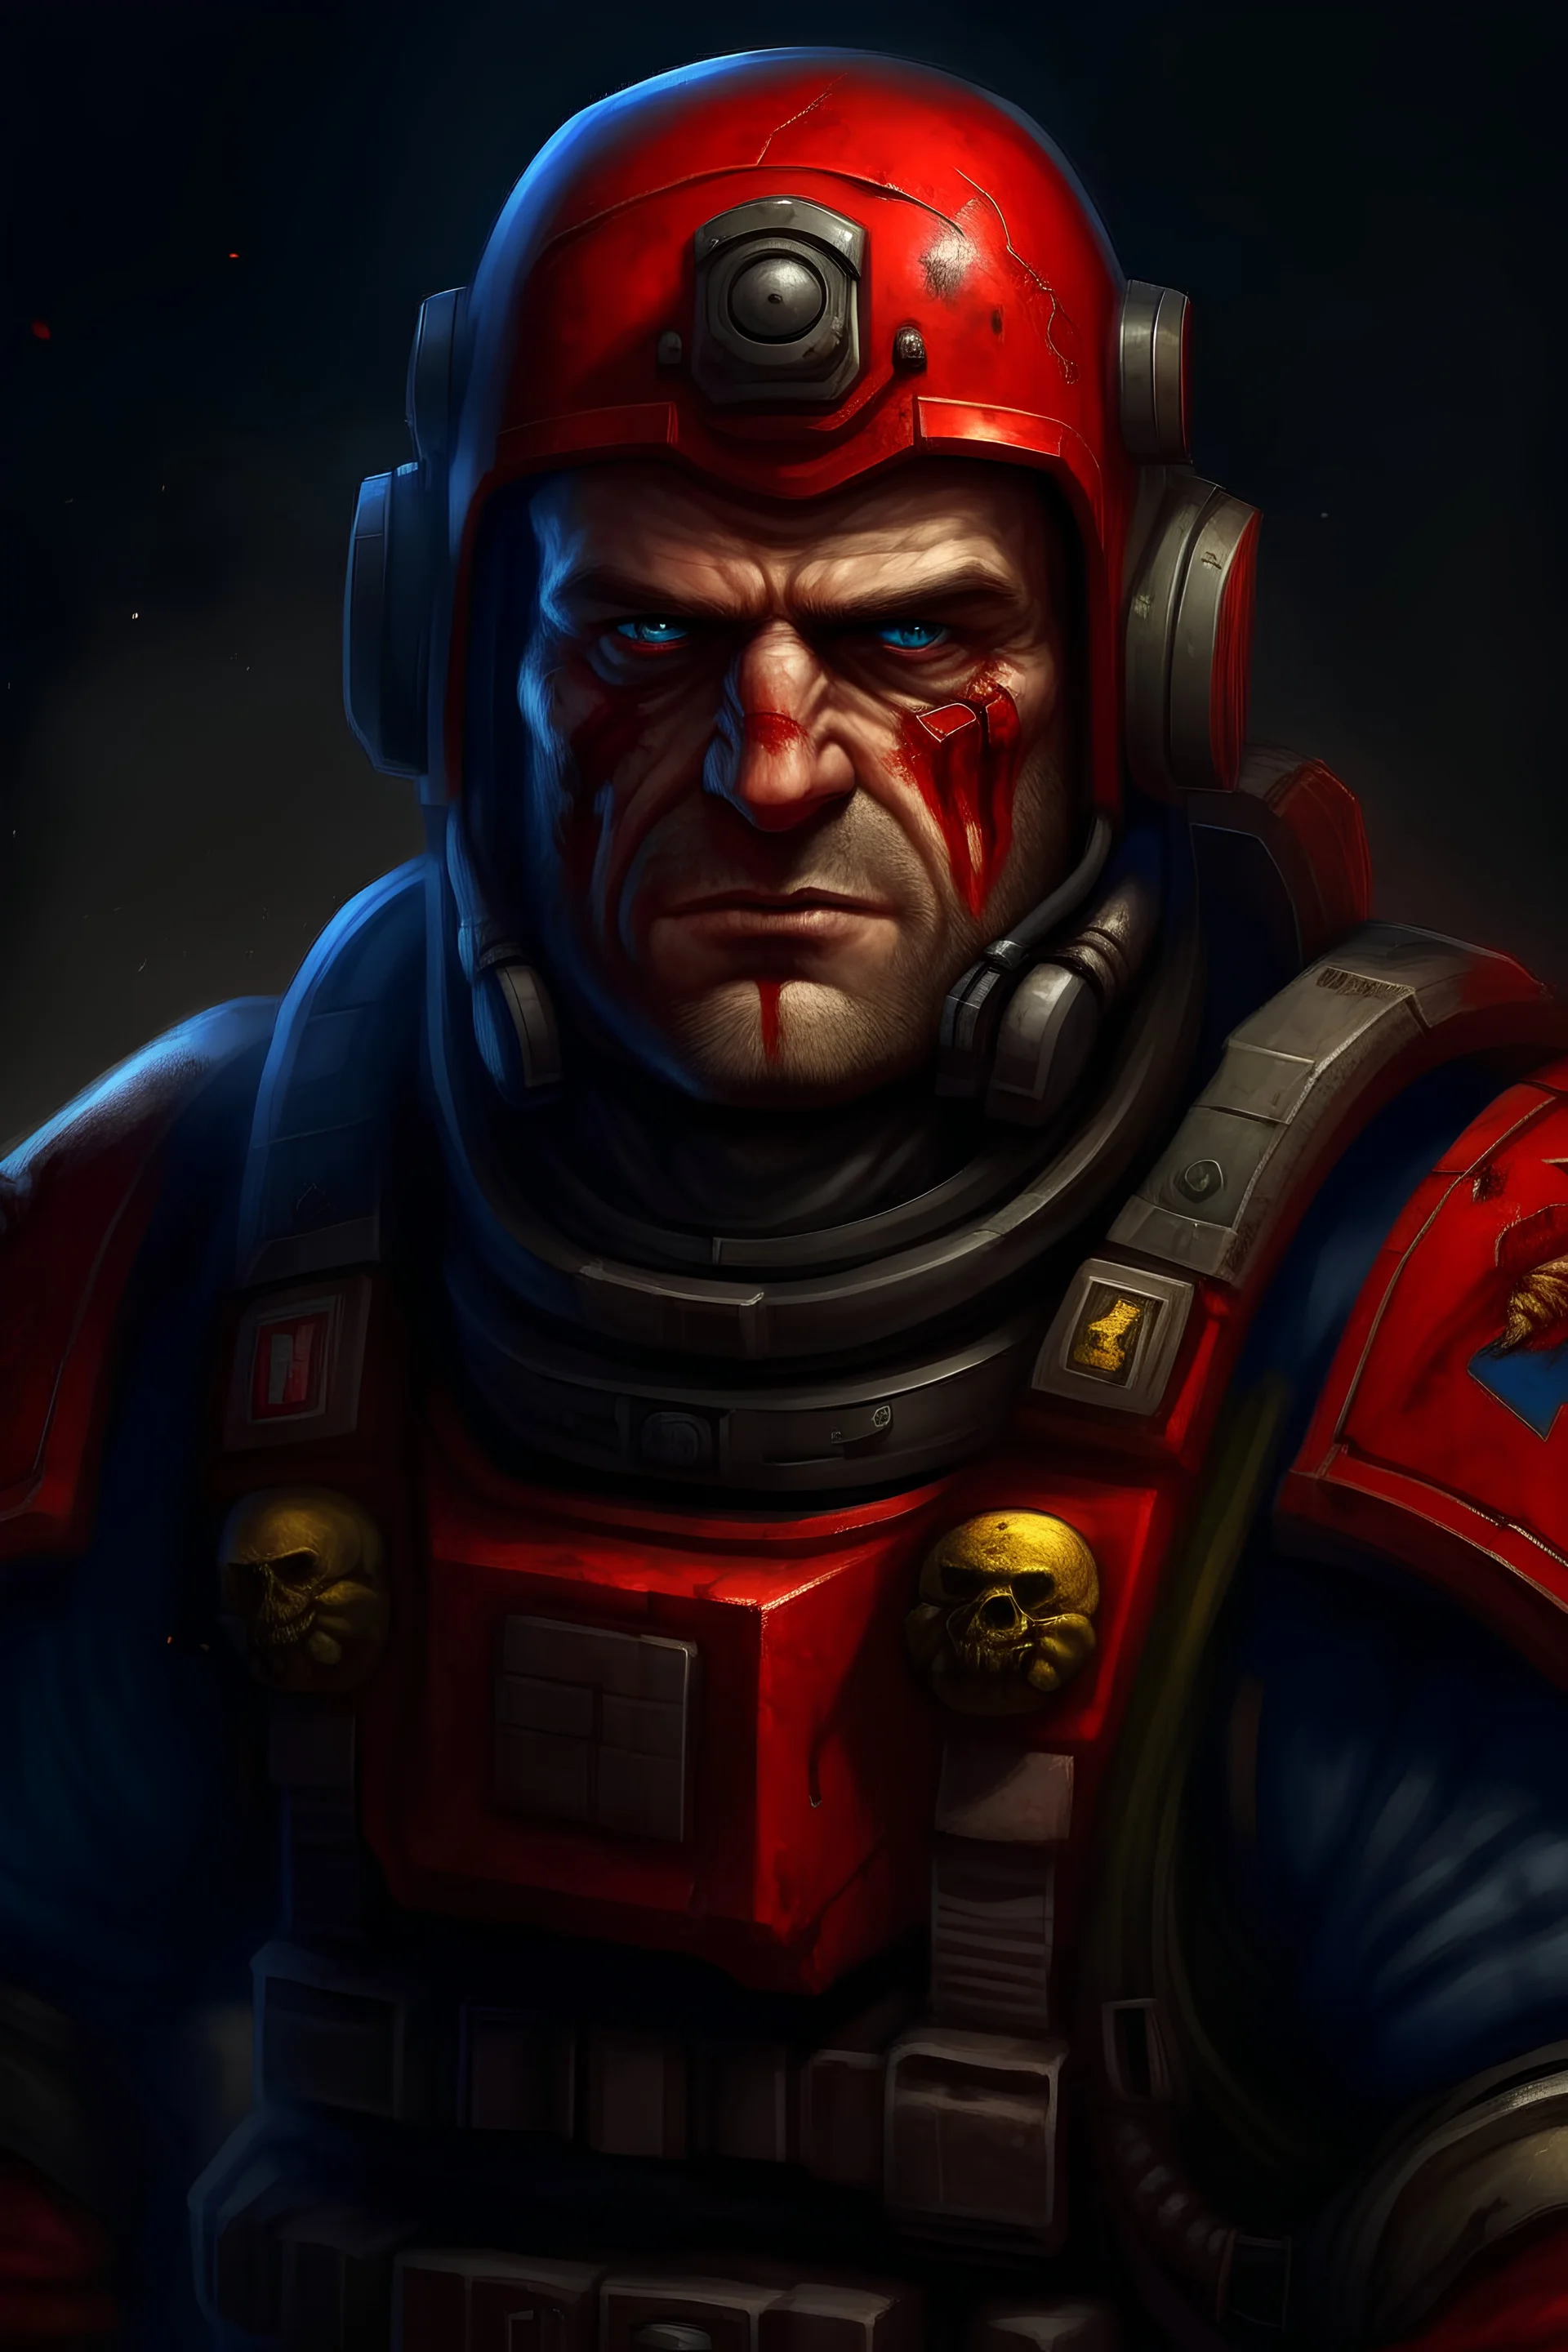 A DIGITAL ART portrait of a space marine. He is 30 years old. His eyes are tired but he has a grim smile. He is not wearing a helmet. His pants have a red stripe. Realistic. with ushanka